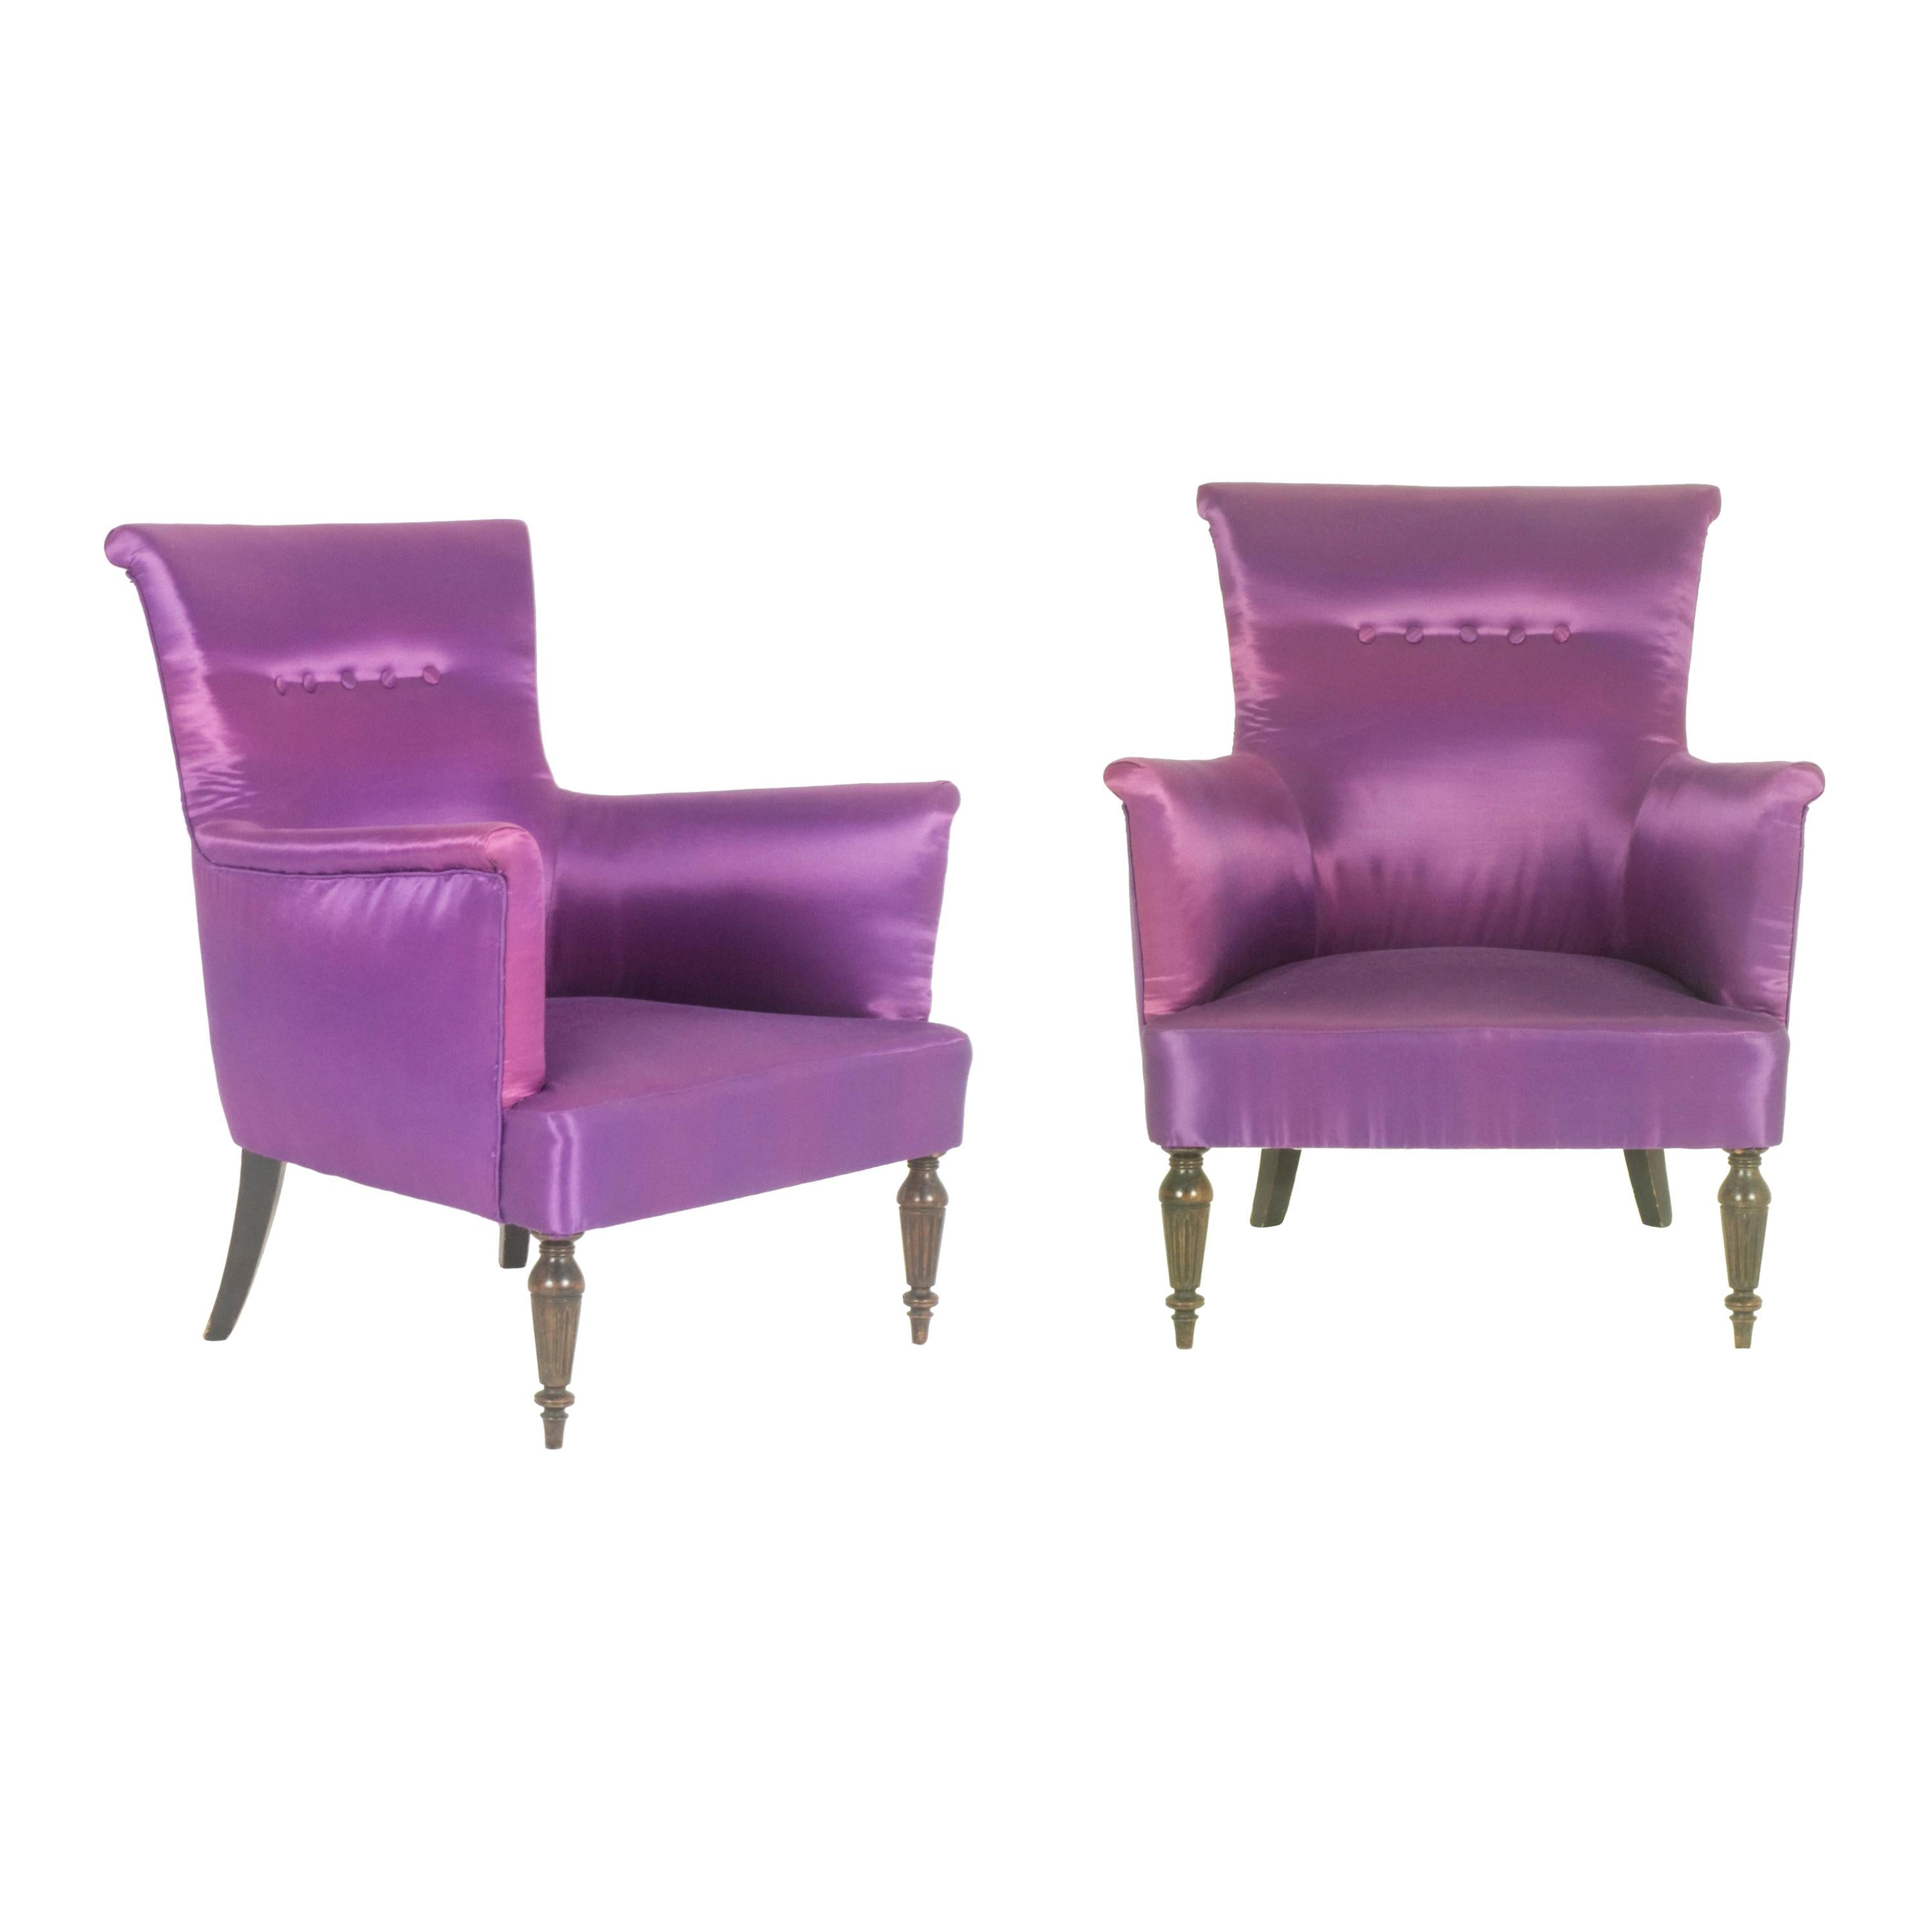 Violet Fabric Italian Armchairs from 1950s, Set of Two For Sale